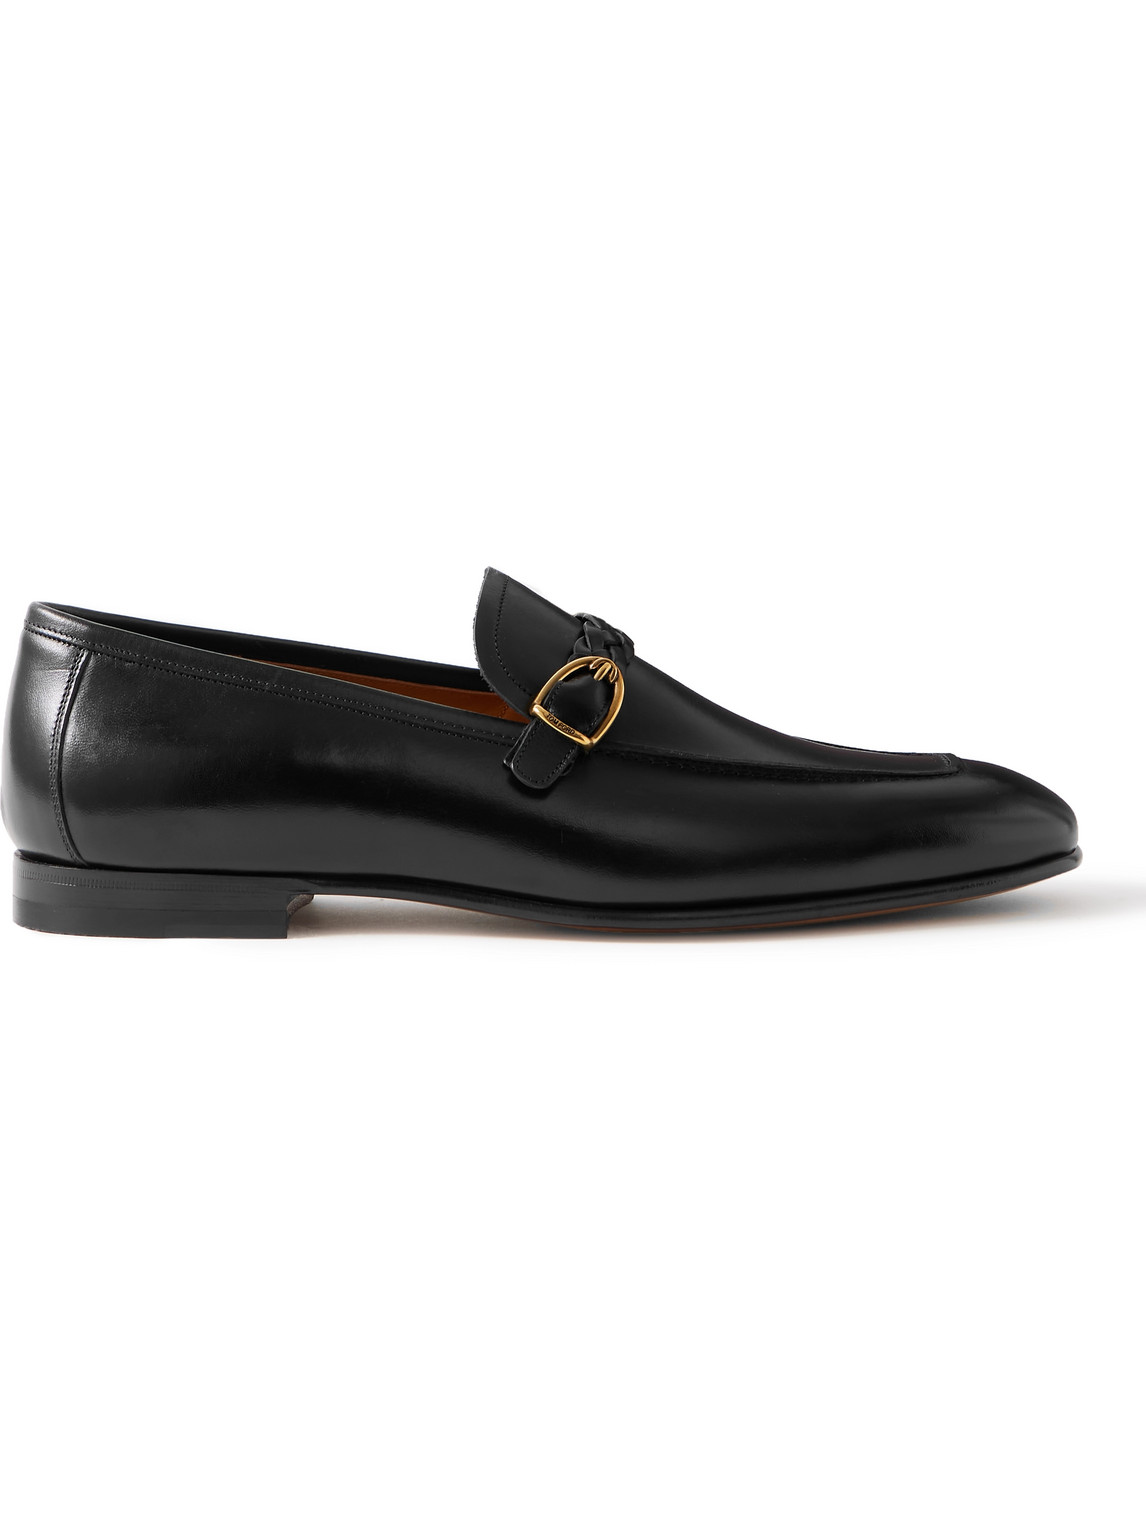 TOM FORD MARTIN BURNISHED-LEATHER LOAFERS